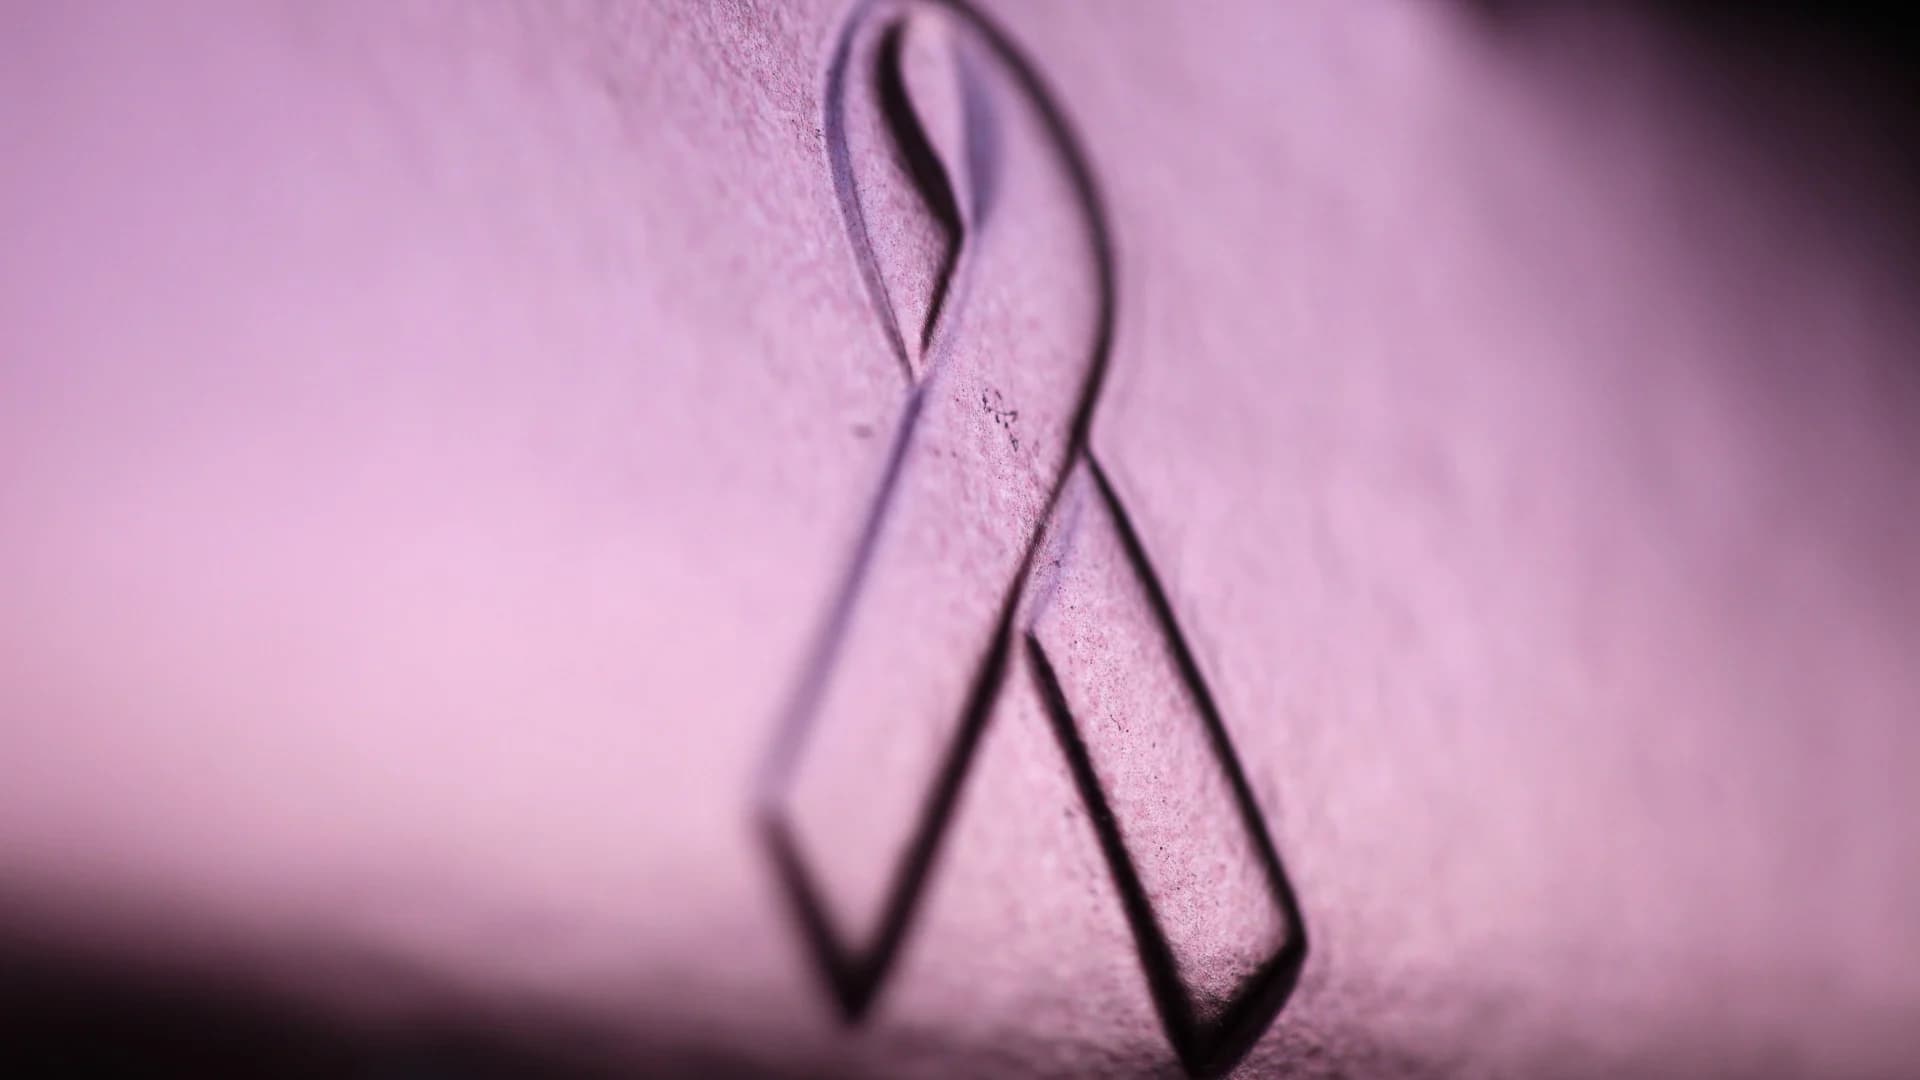 Surviving Breast Cancer: What the Head of Cheddar News Wishes She Knew When She was Diagnosed